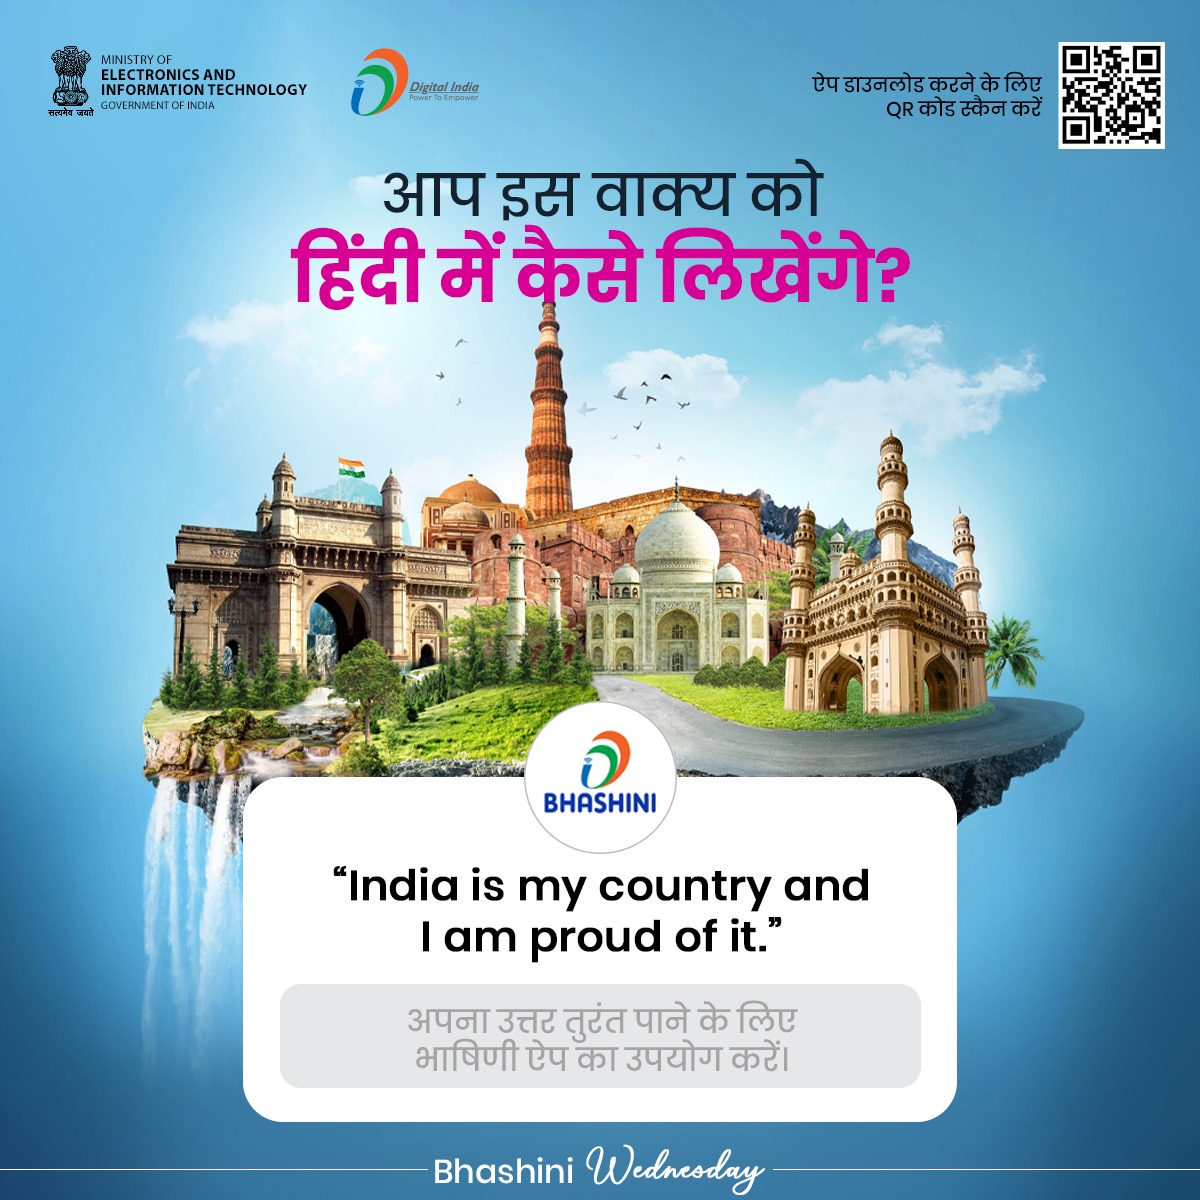 🌟Write the correct answer🌟 Use the text-to-text translation service on the Bhashini app, the made-in-India solution that is breaking language barriers across the country. Visit bhashini.gov.in #DigitalIndia #BhashiniWednesday @_BHASHINI @amitabhnag